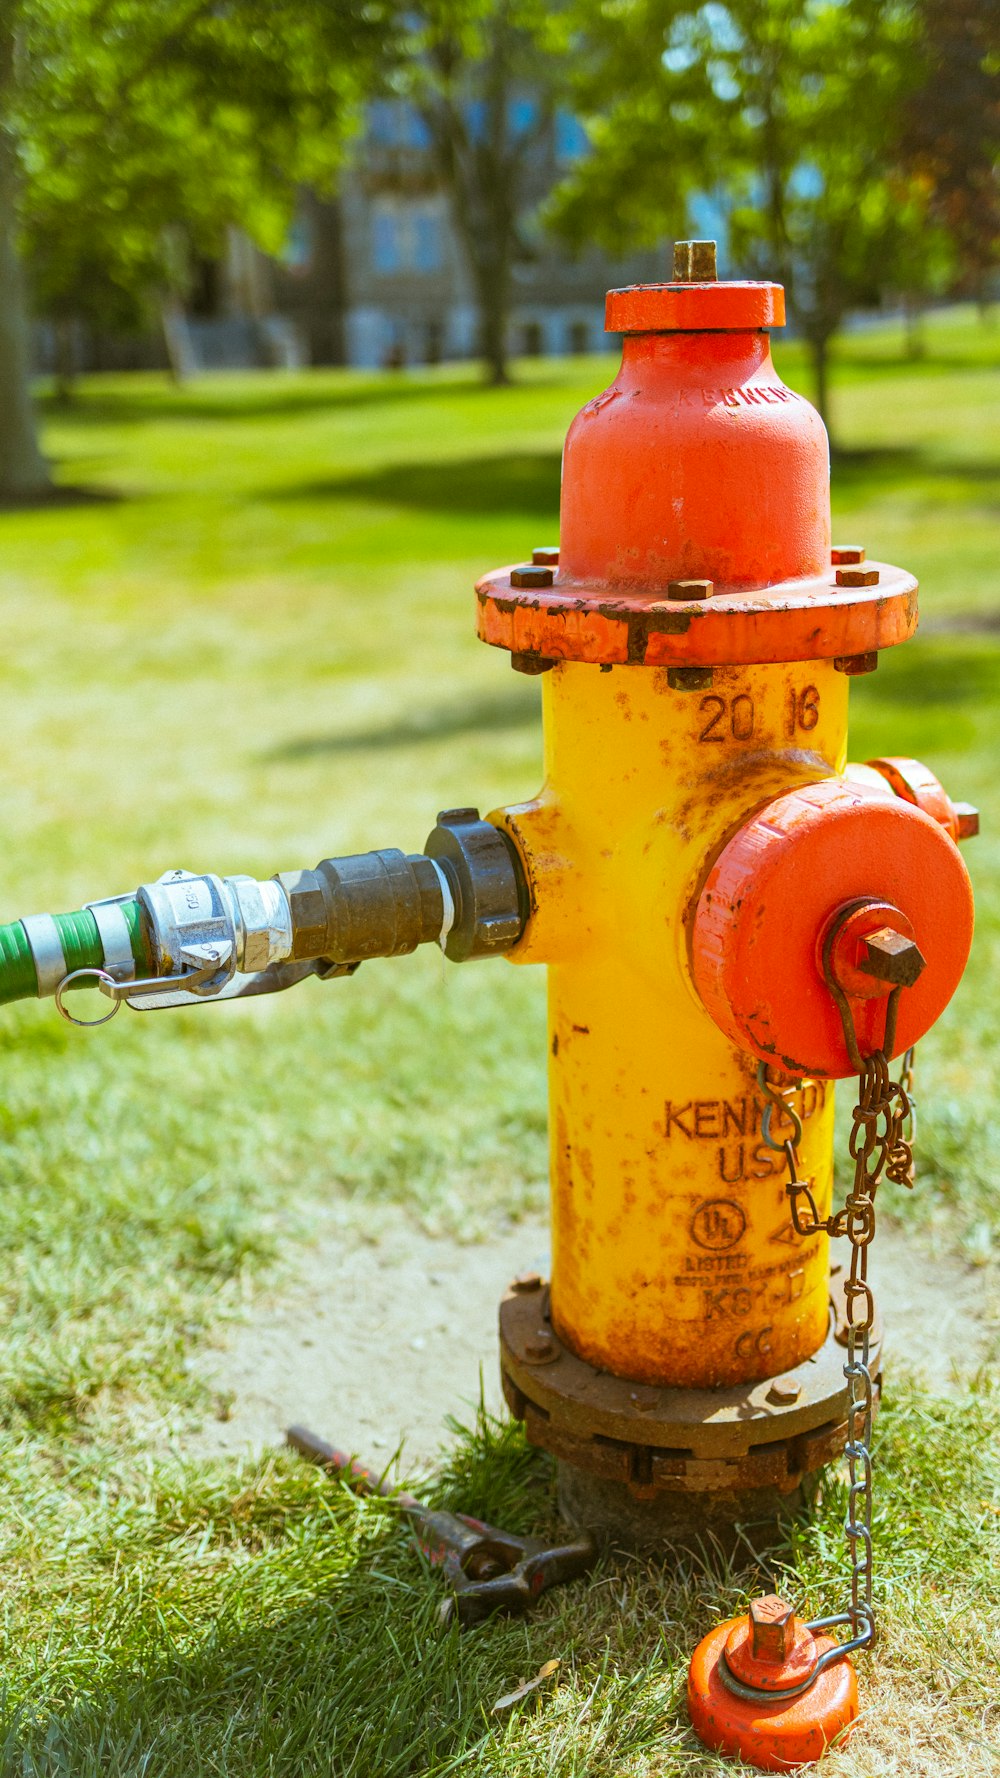 a fire hydrant is stationed in a grassy area